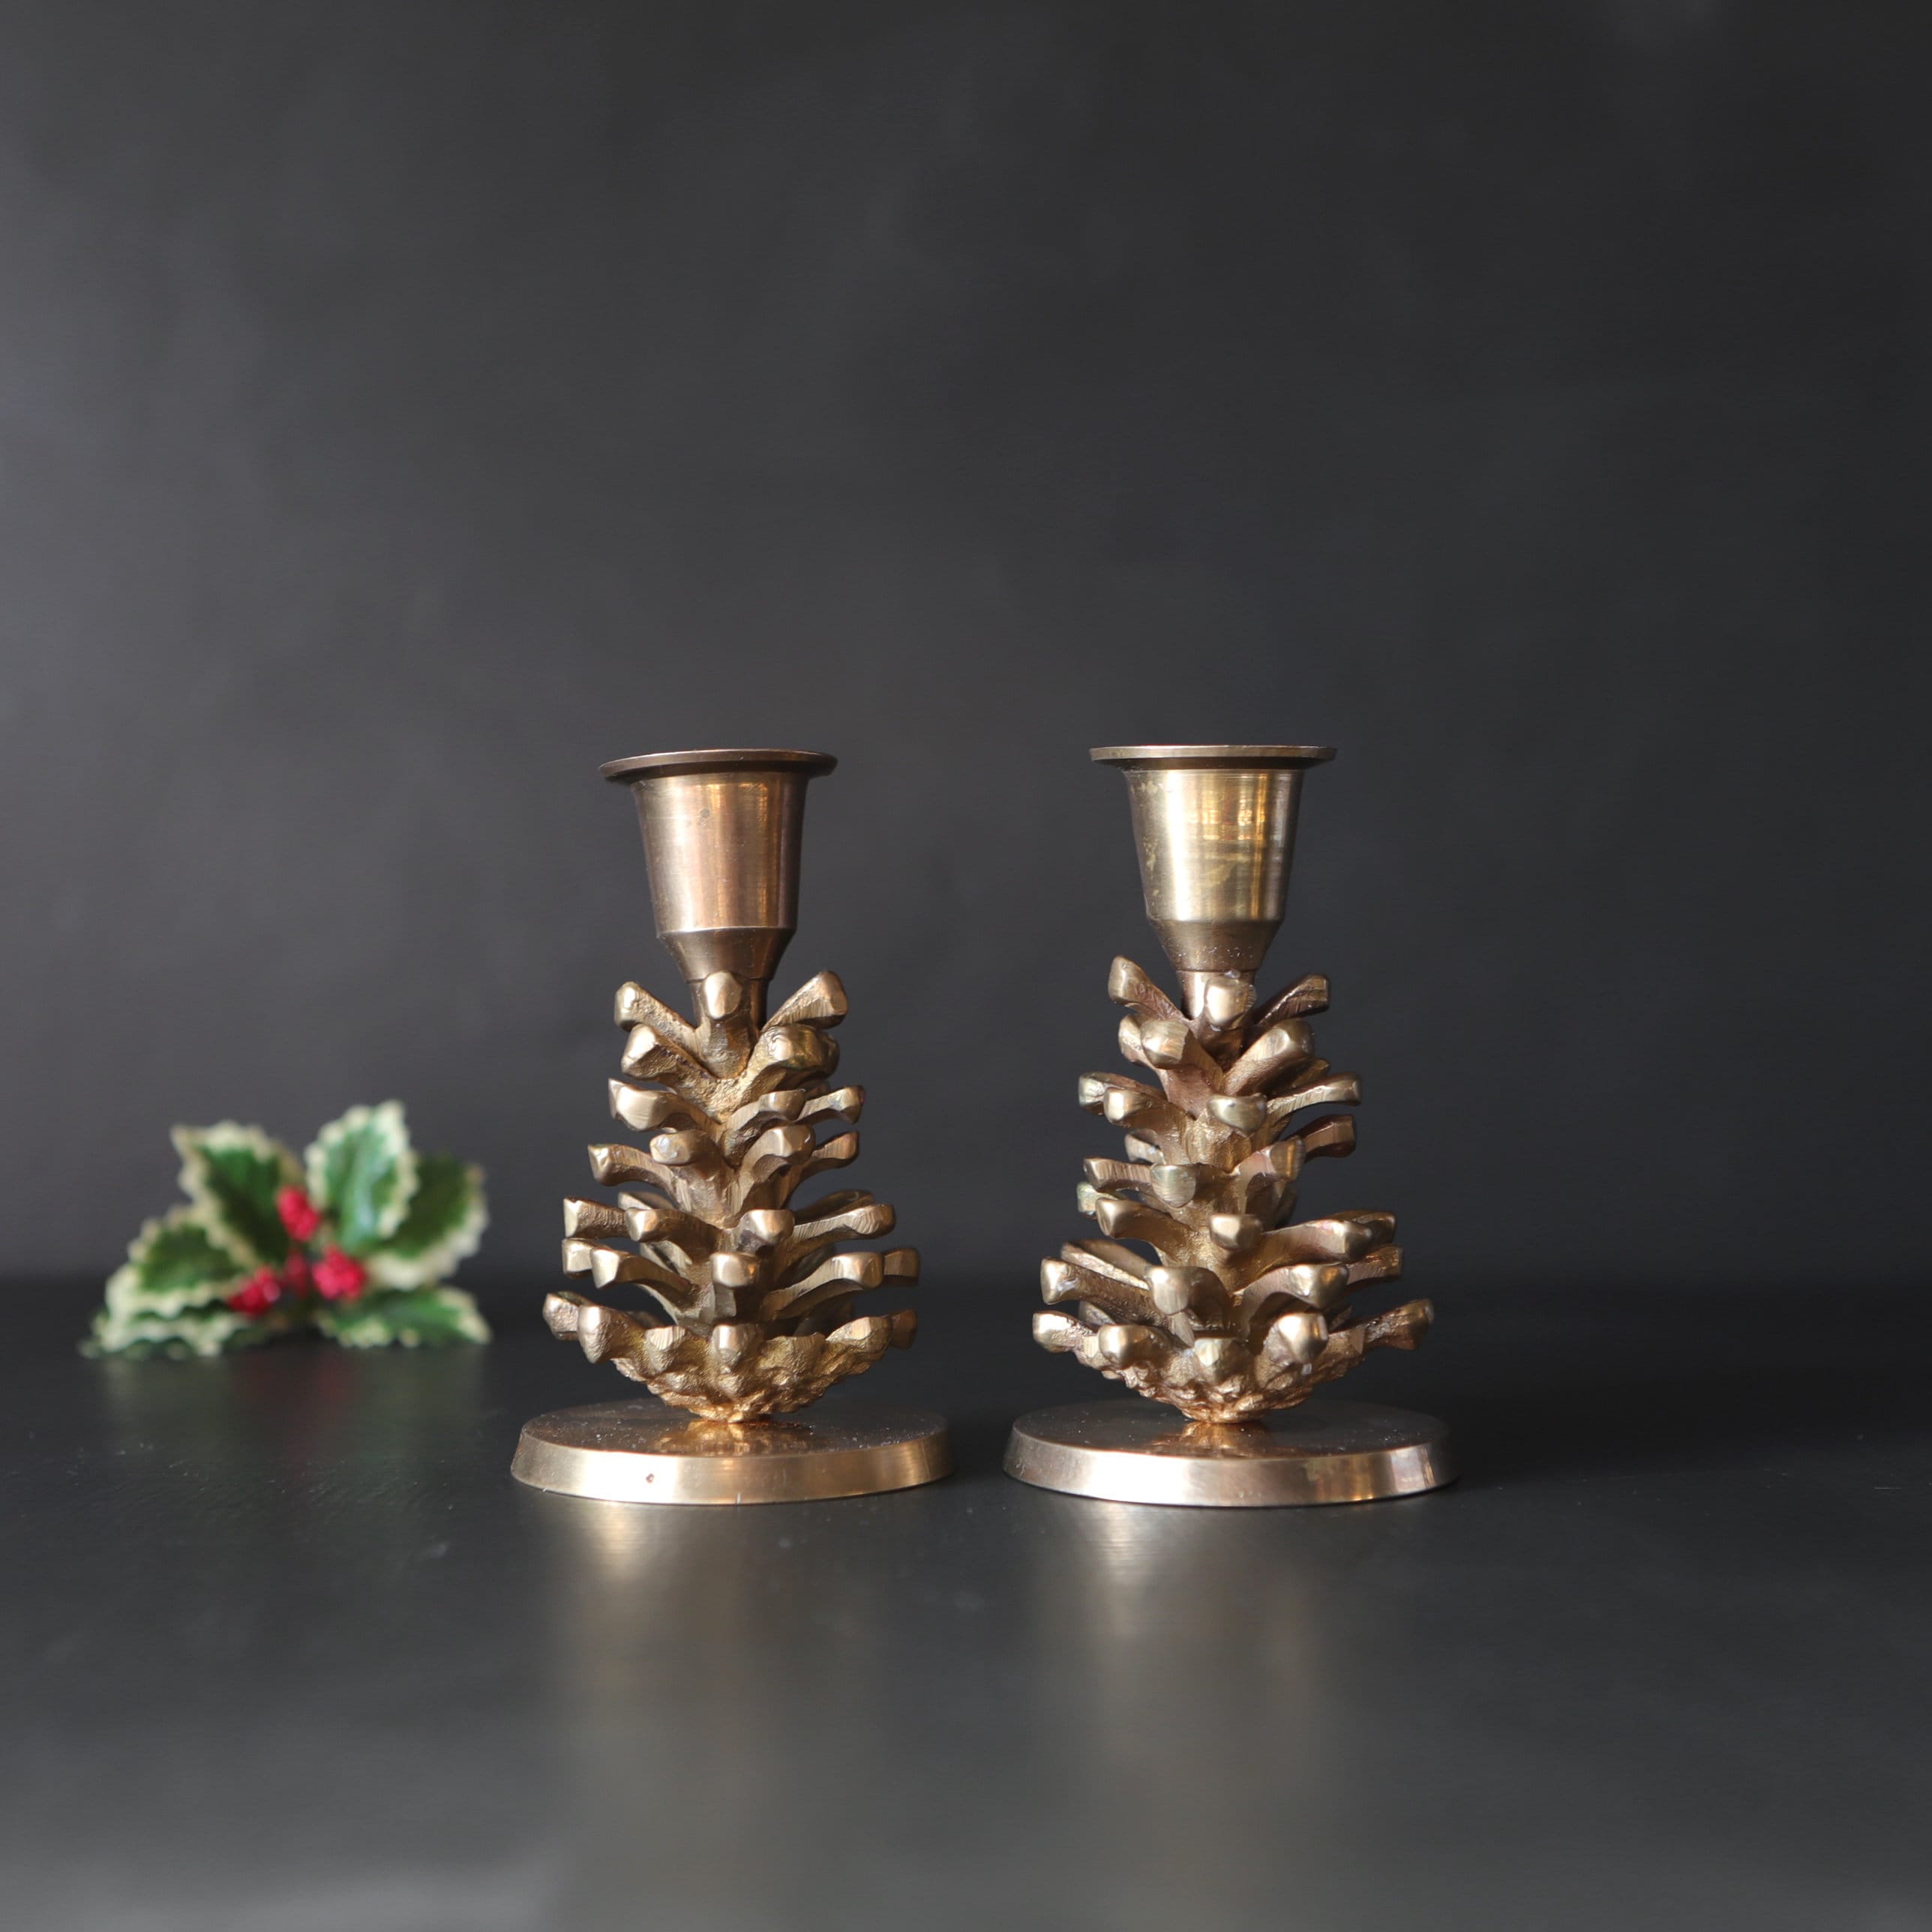 2x Brass Pinecone Candlesticks Vintage Pine Cone Candle Holders Classic  Christmas Decor 